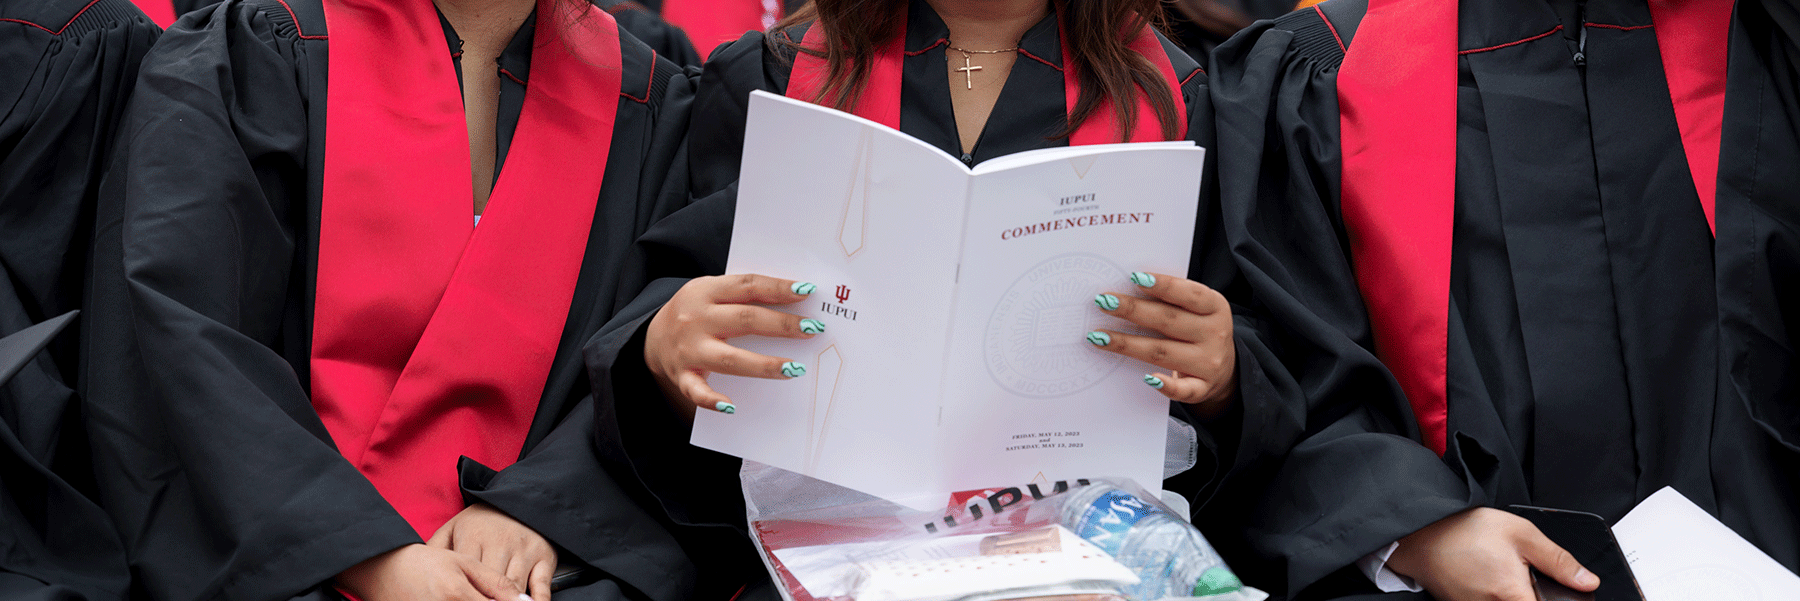 A graduate holds open a commencement program during the ceremony.